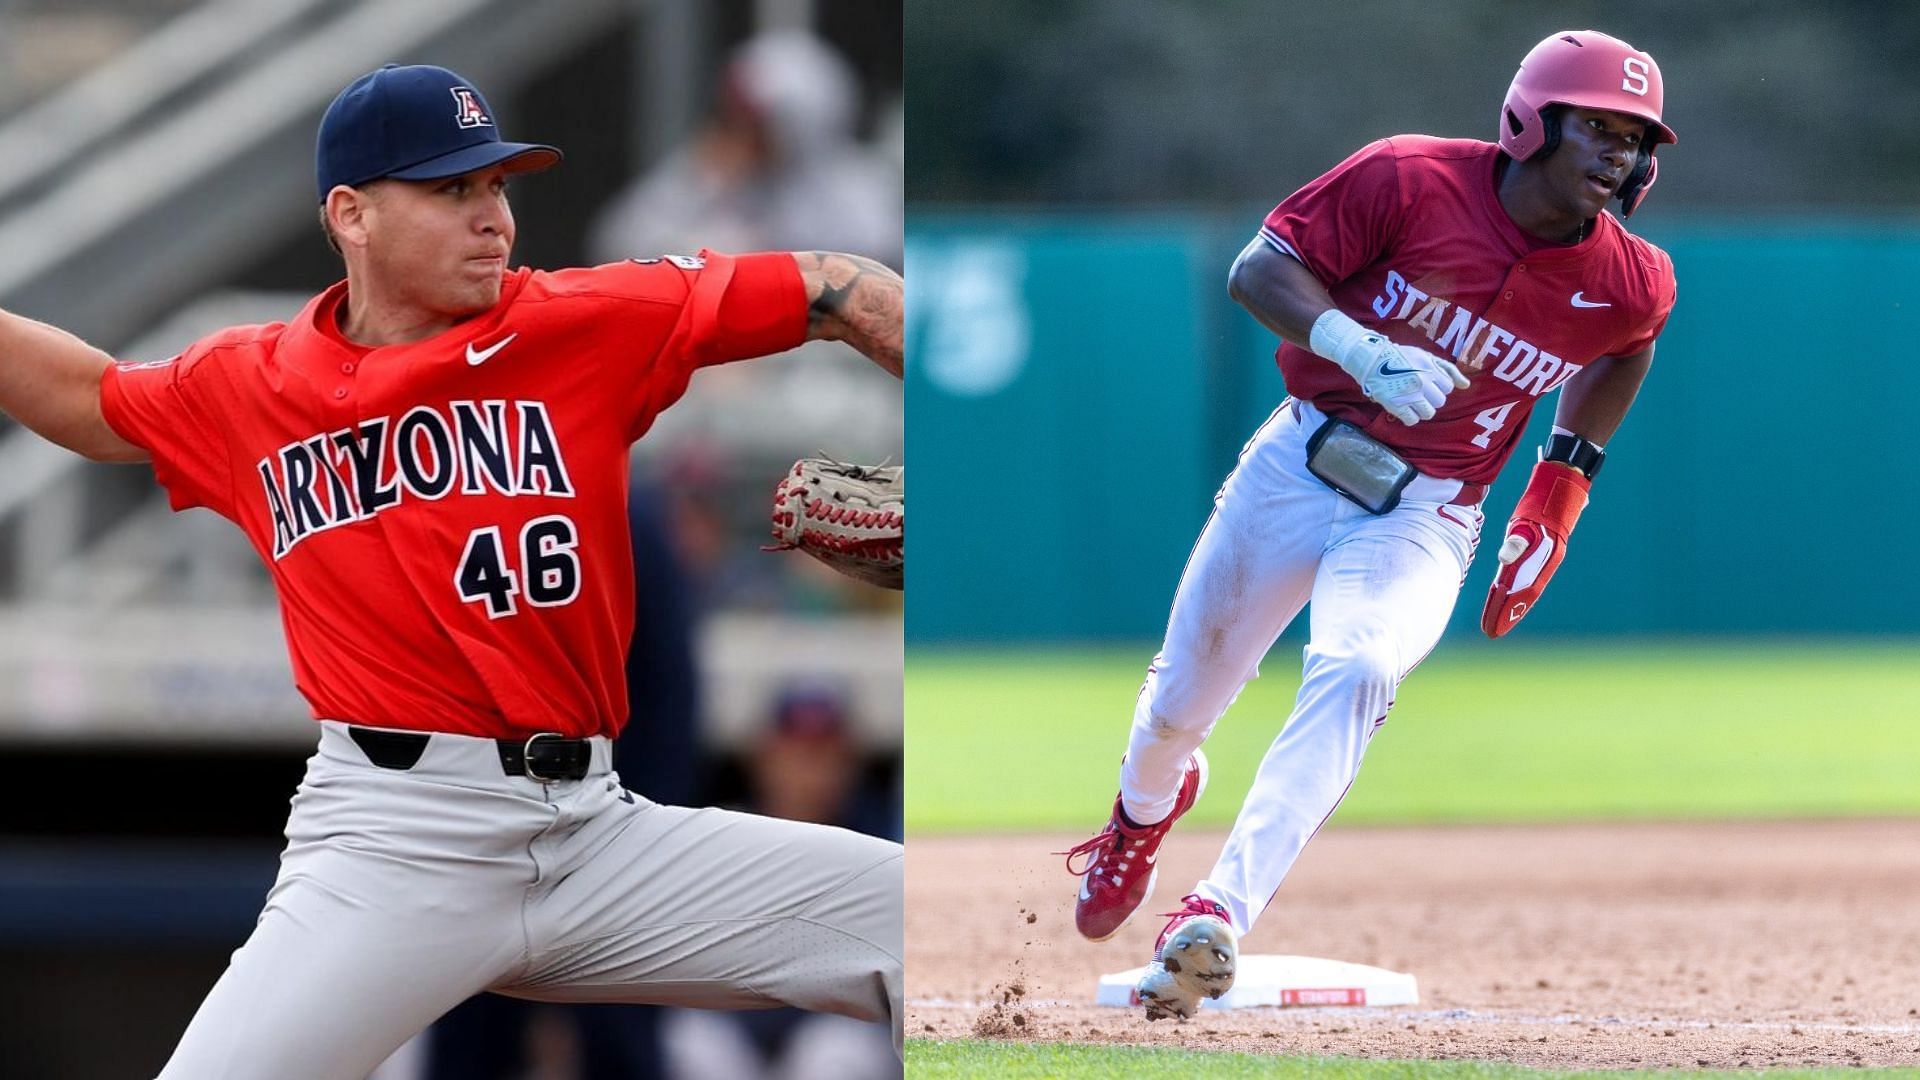 Pac-12 baseball tournament semifinals projections: Schedules, results and more